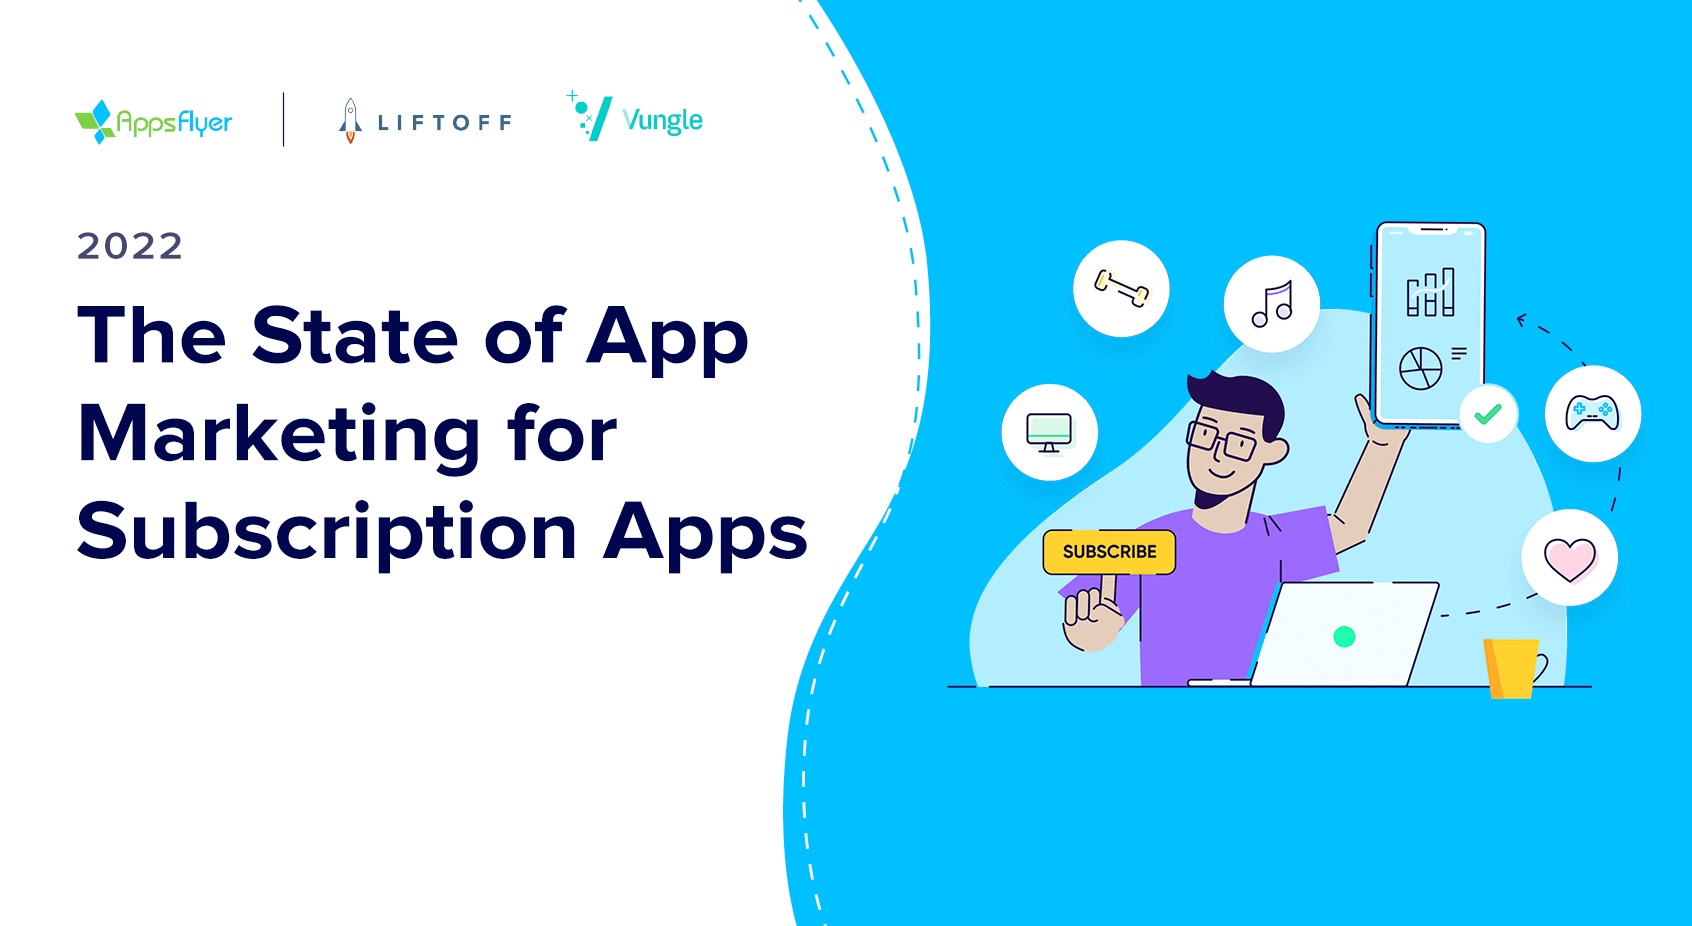 2022 The State of App Marketing for Subscription Apps